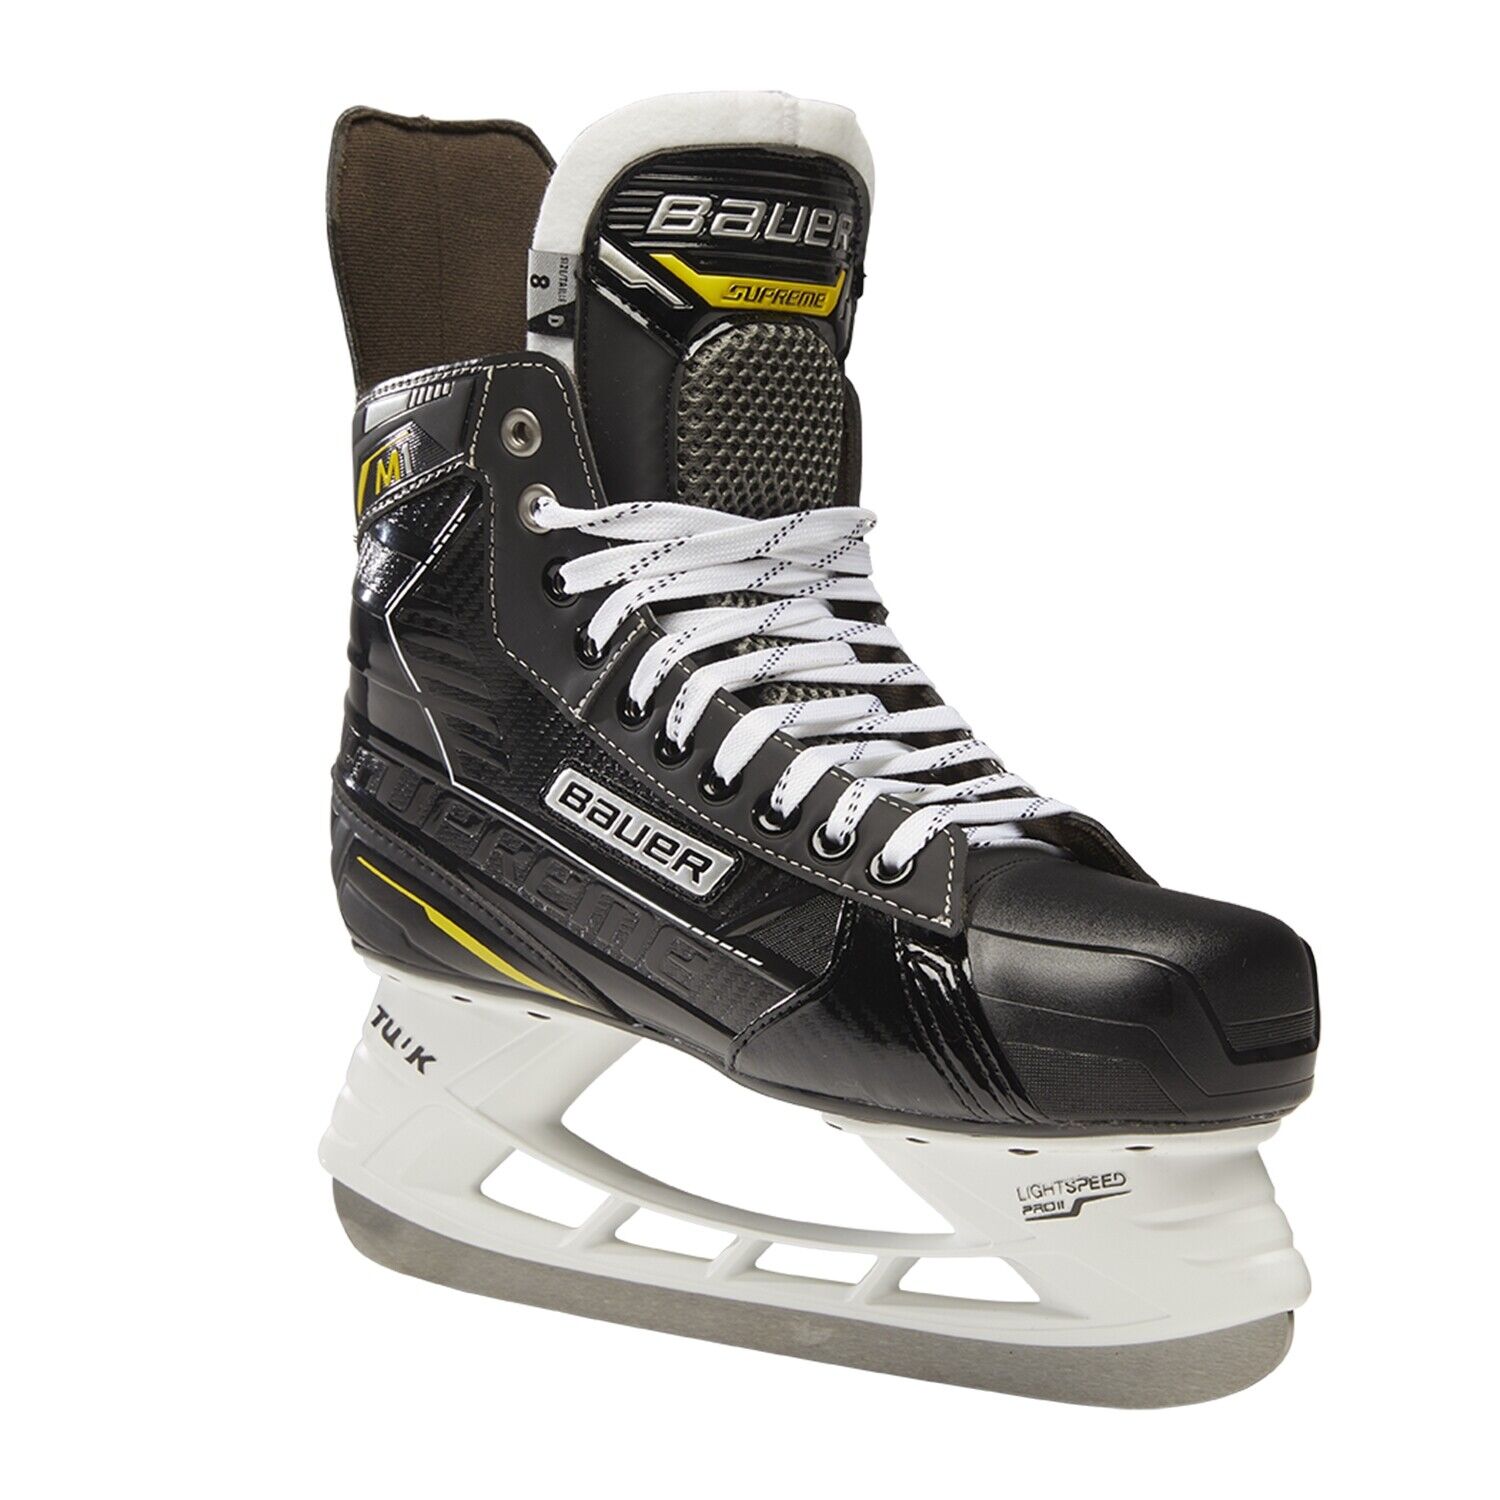 Looking to Buy Bauer Skates This Year: Discover the Best Bauer Rollerblades, Skates and More for Hockey Players